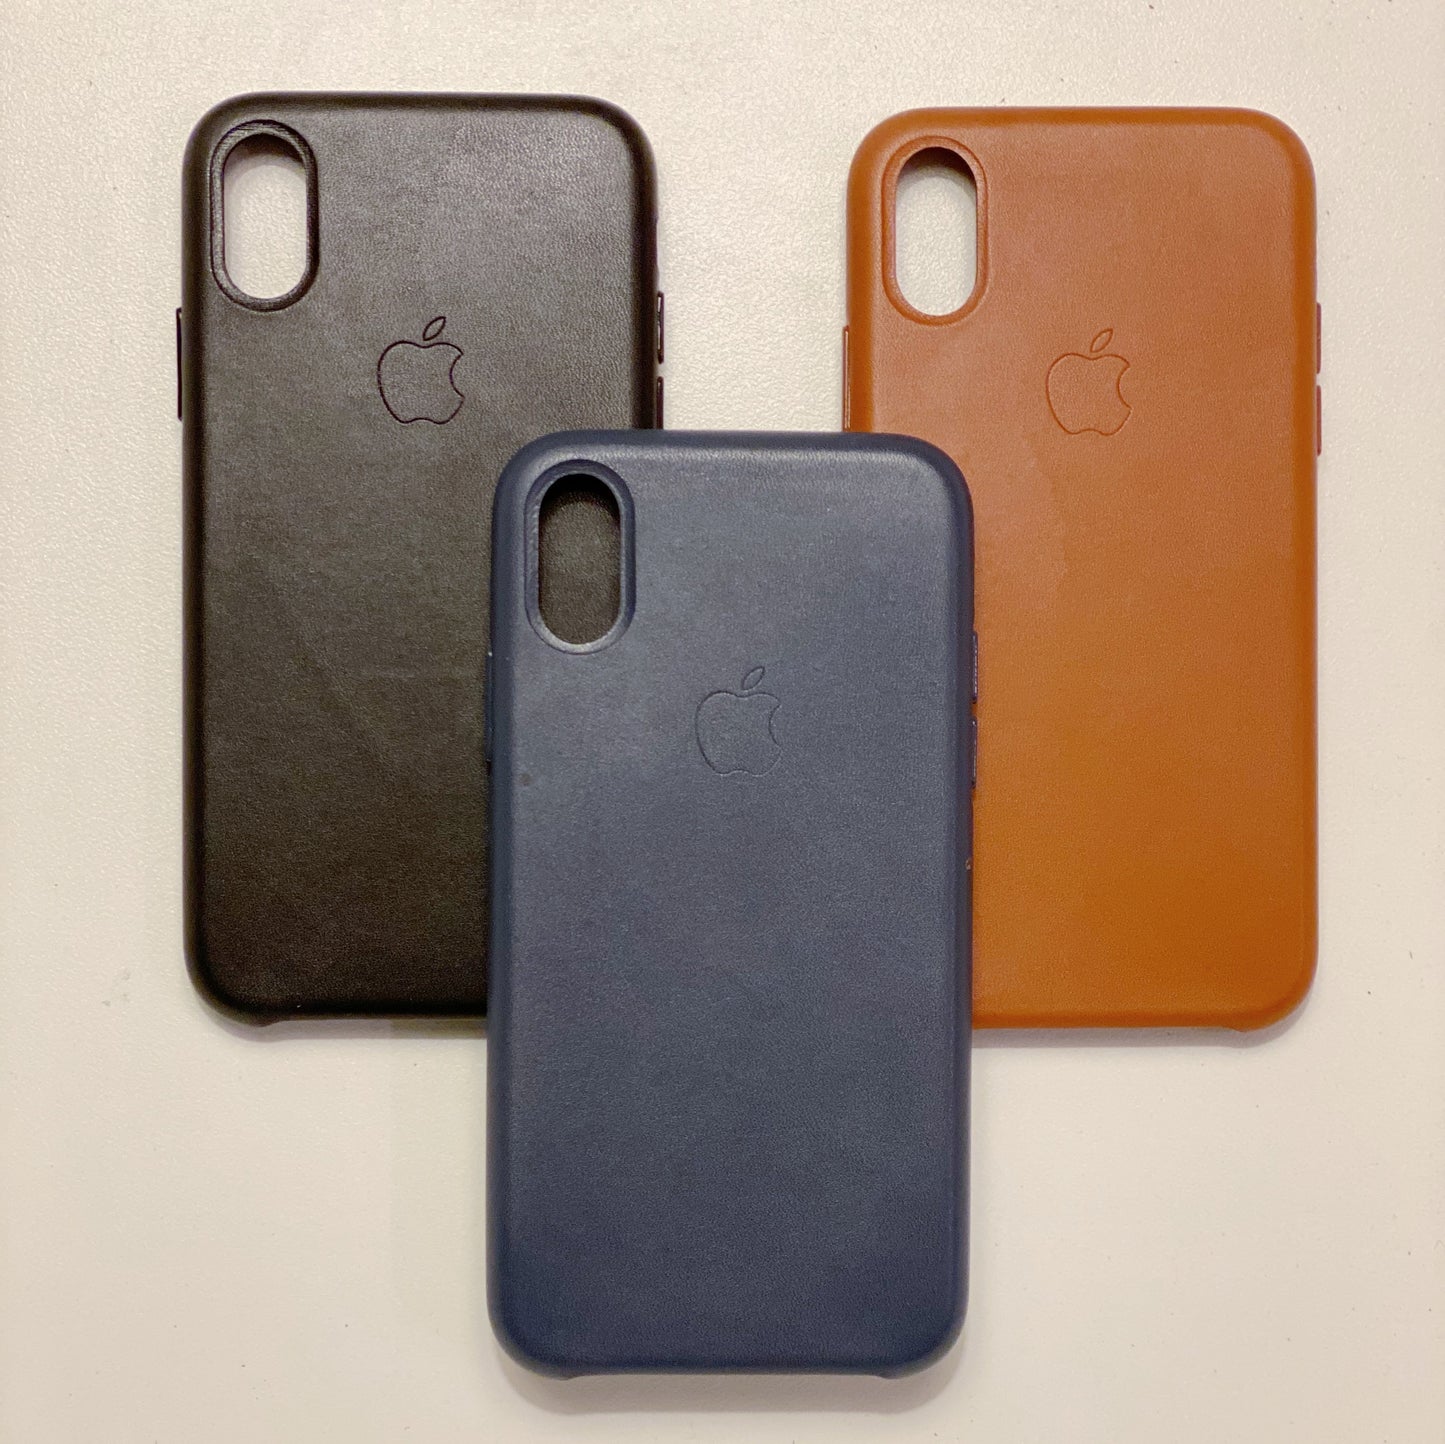 Leather iPhone Case with logo